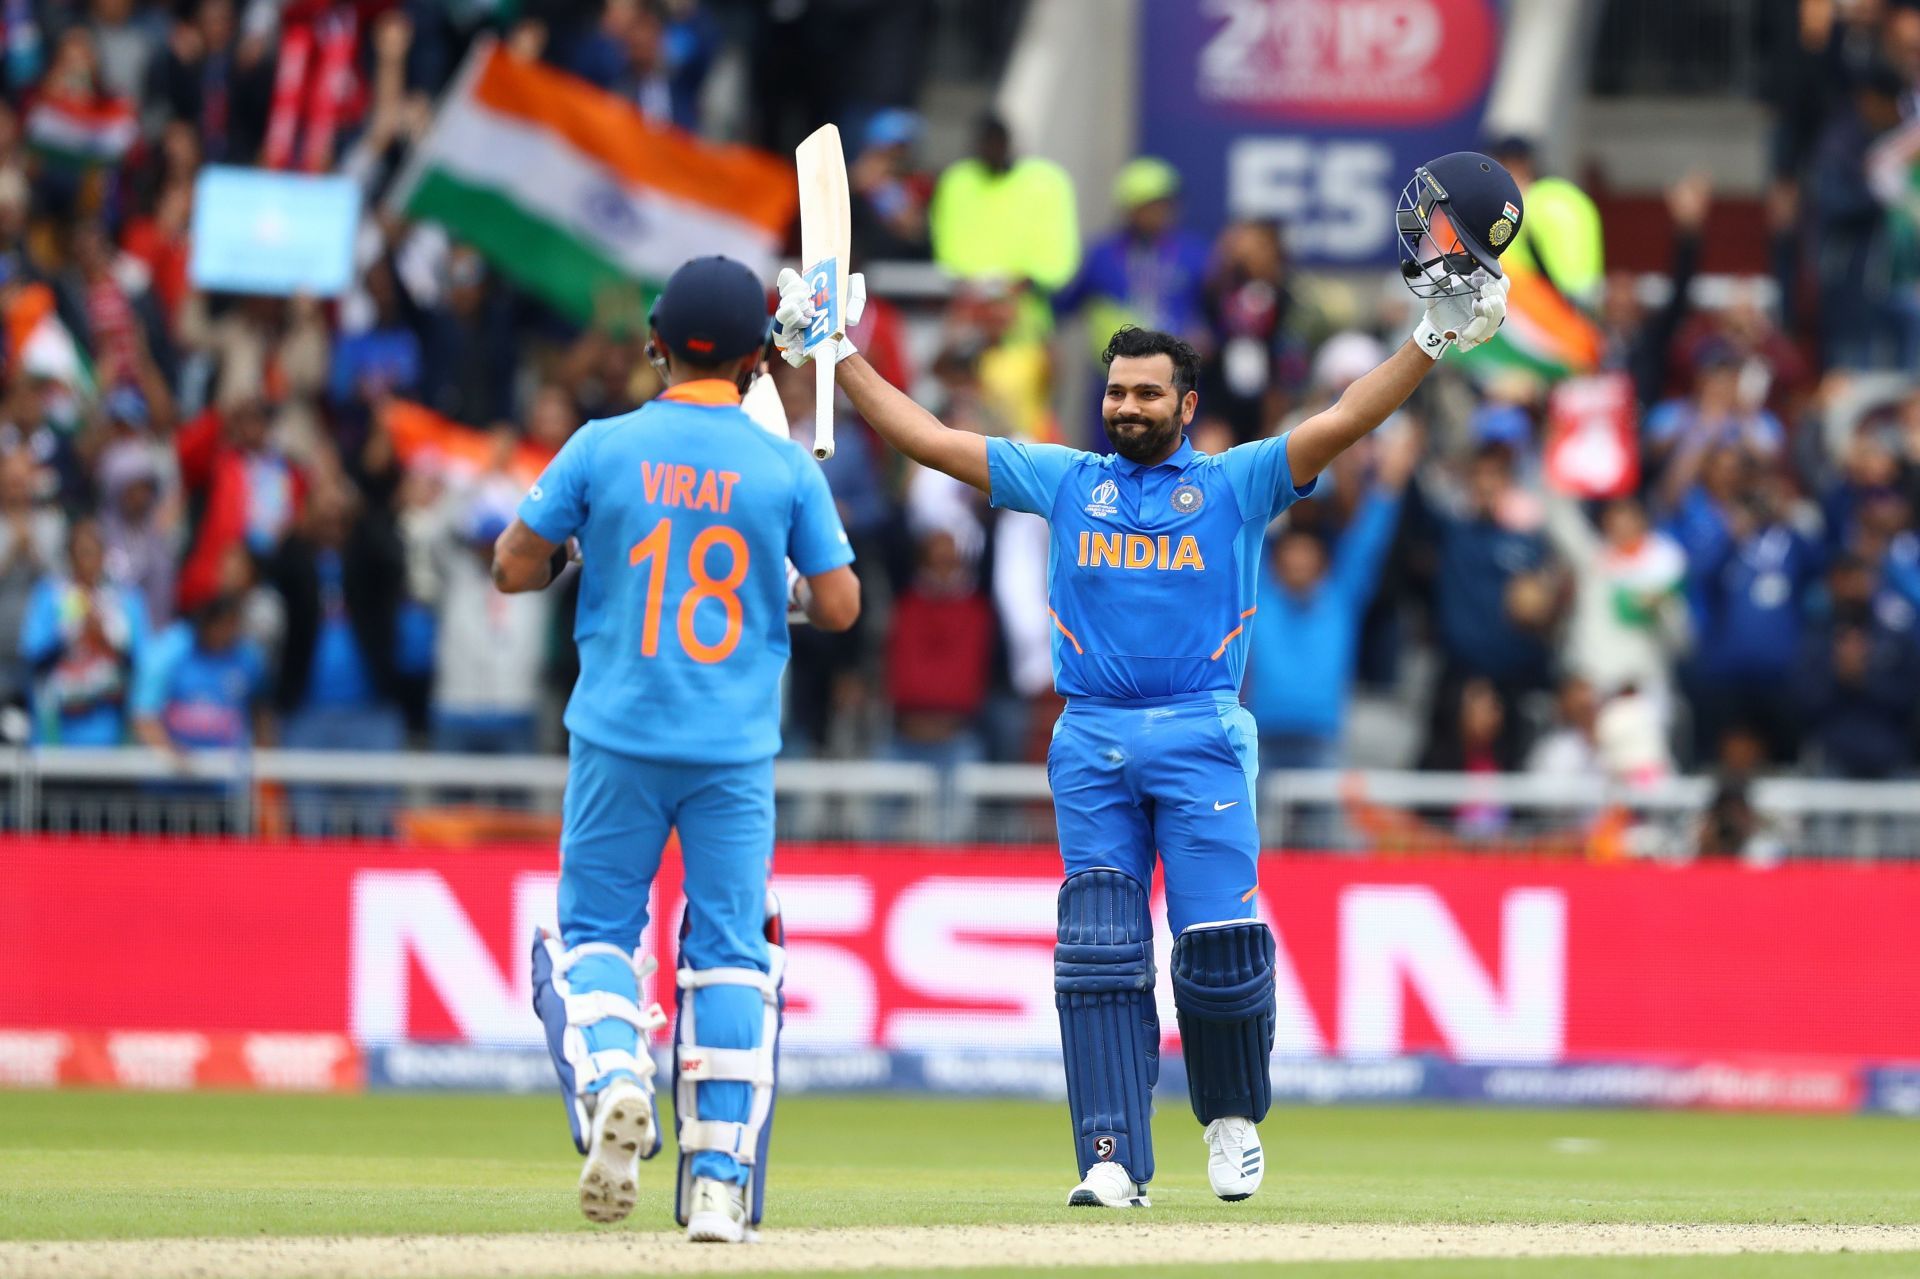 Rohit Sharma was the highest run-getter in the 2019 World Cup.